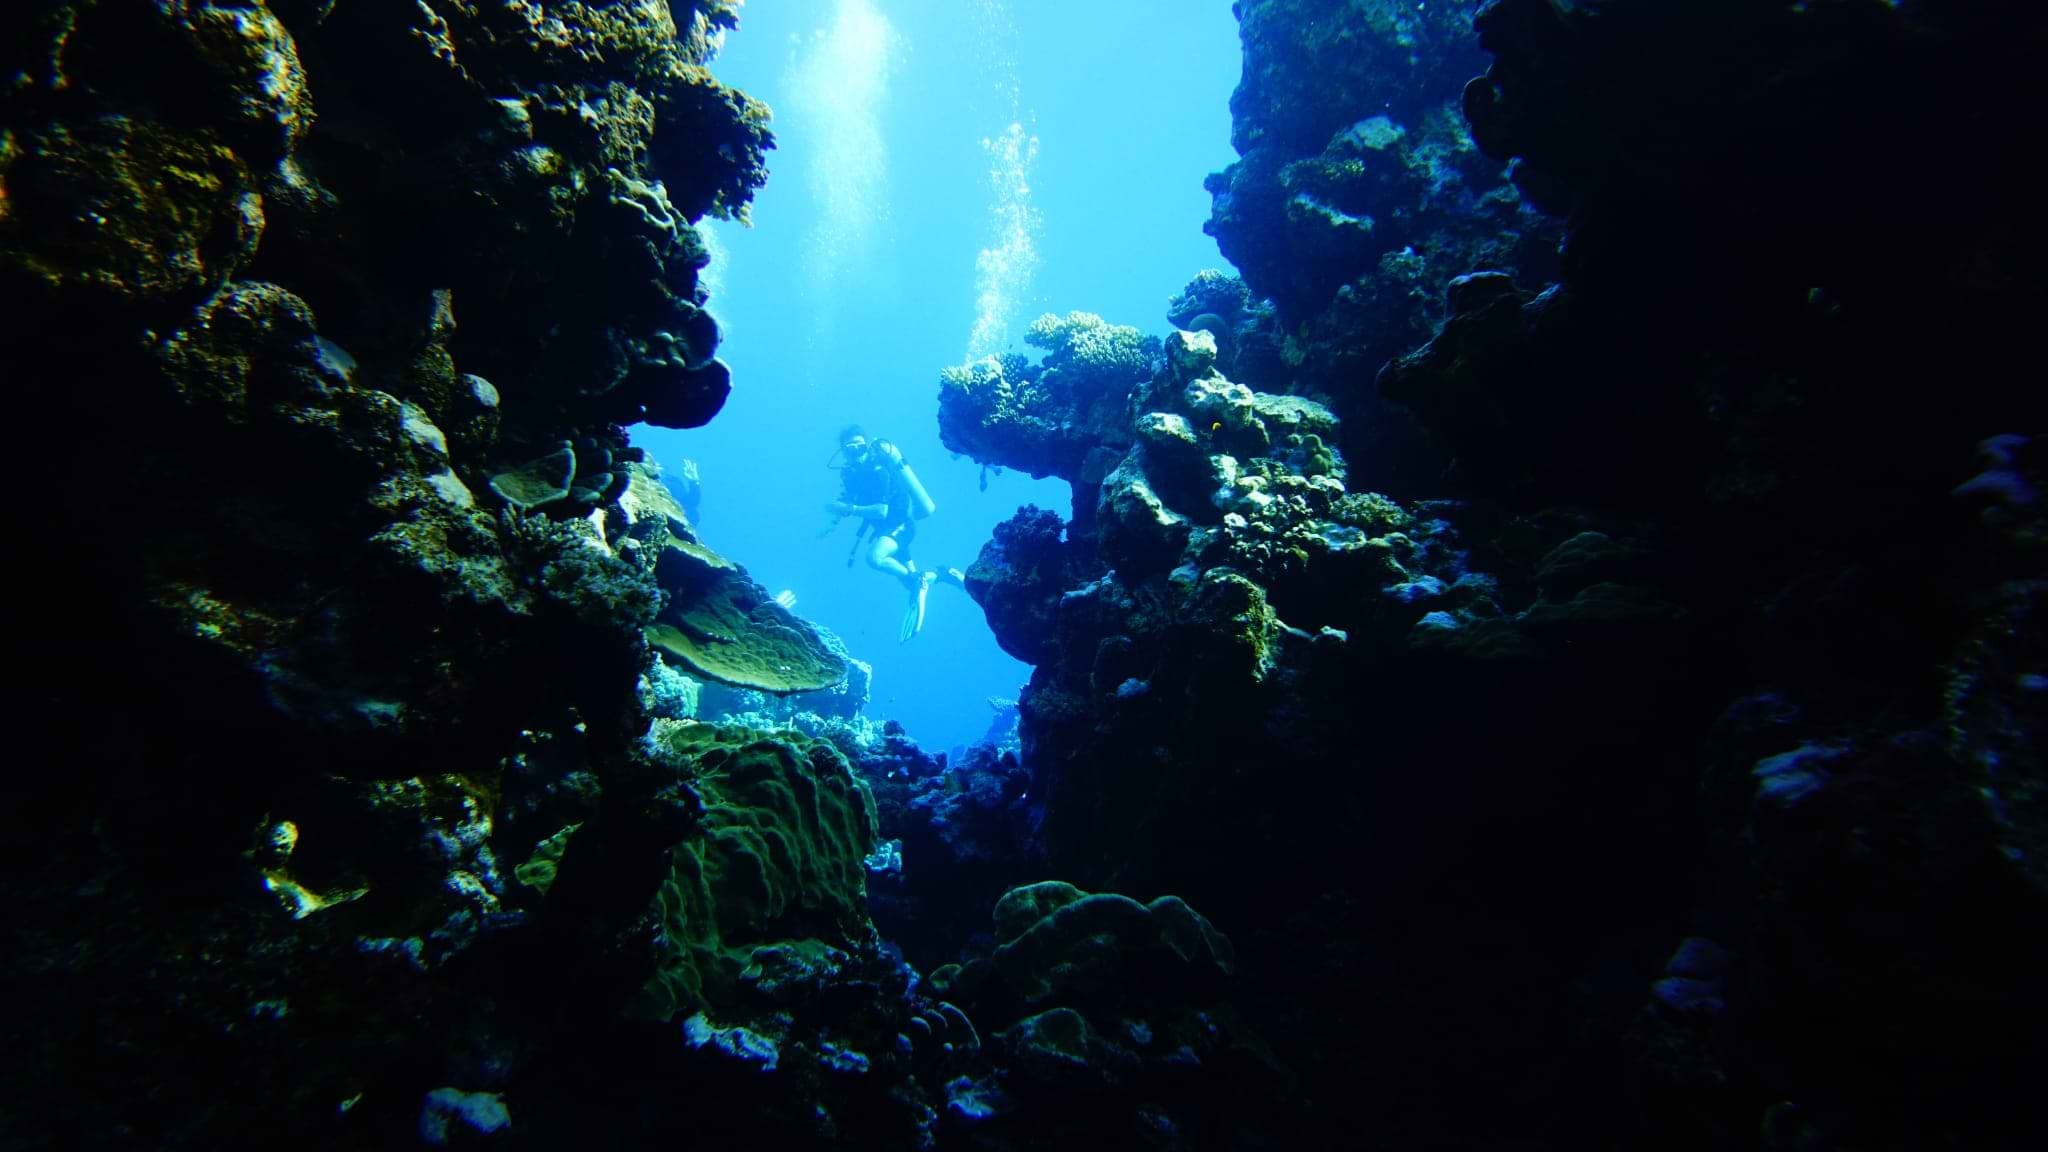 A scuba diver seen from a distance in an opening between two wallks of coral